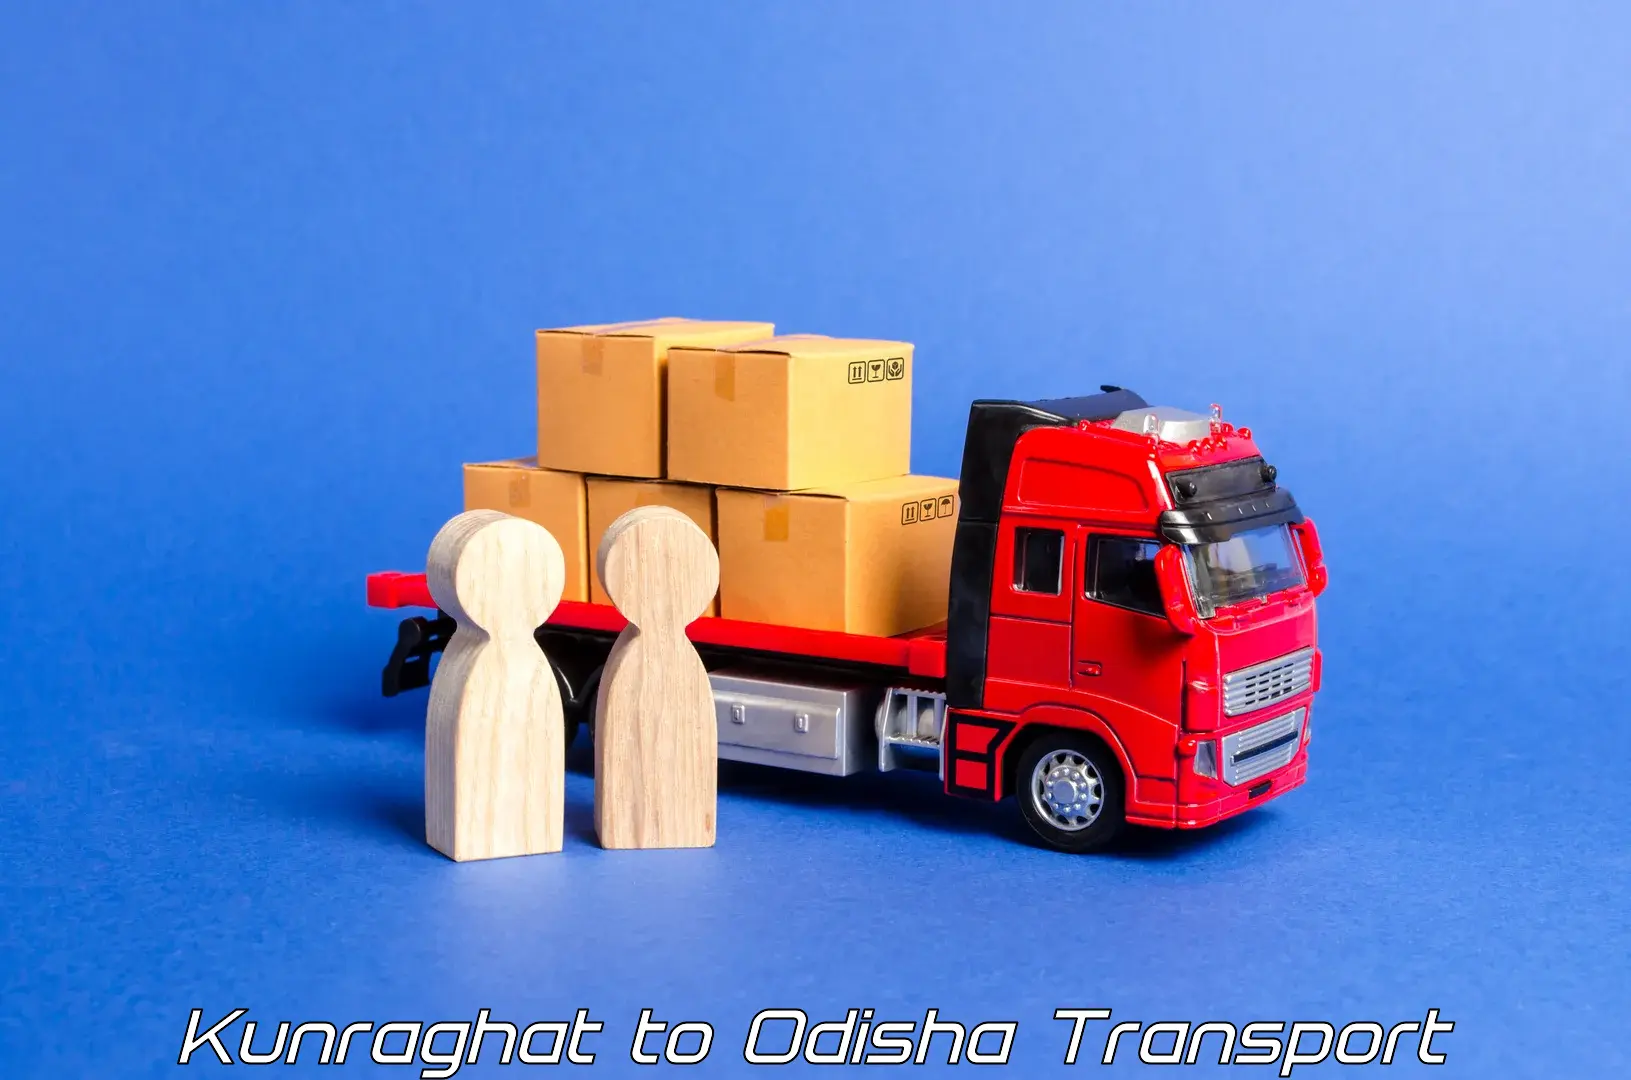 Shipping services Kunraghat to Jharsuguda